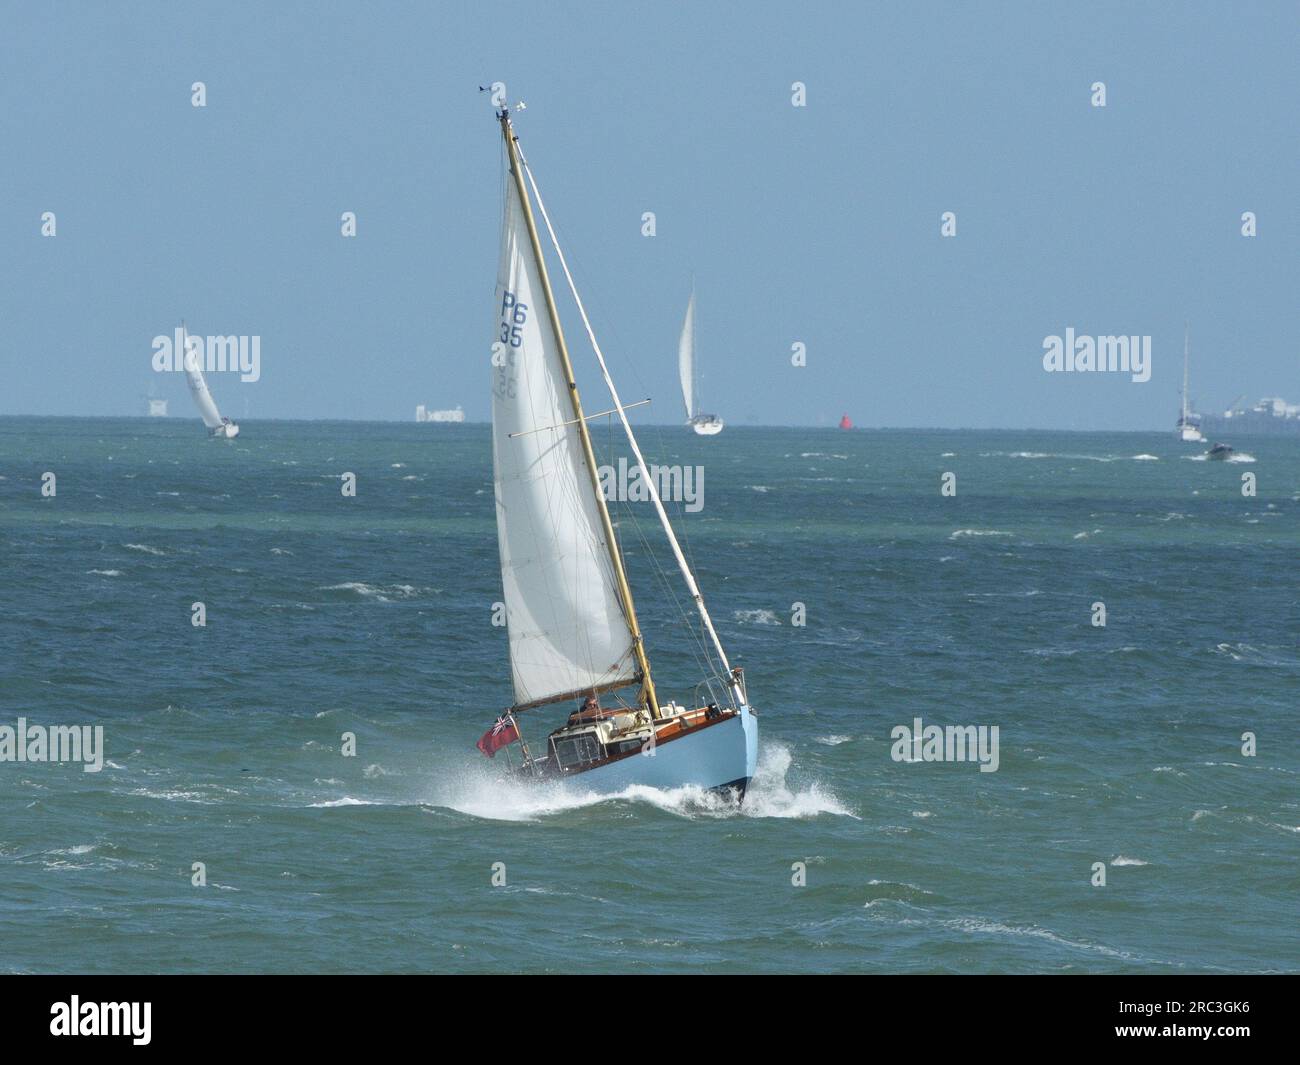 Wooden sailing boat on the Solent near the Isle of Wight.UK Stock Photo